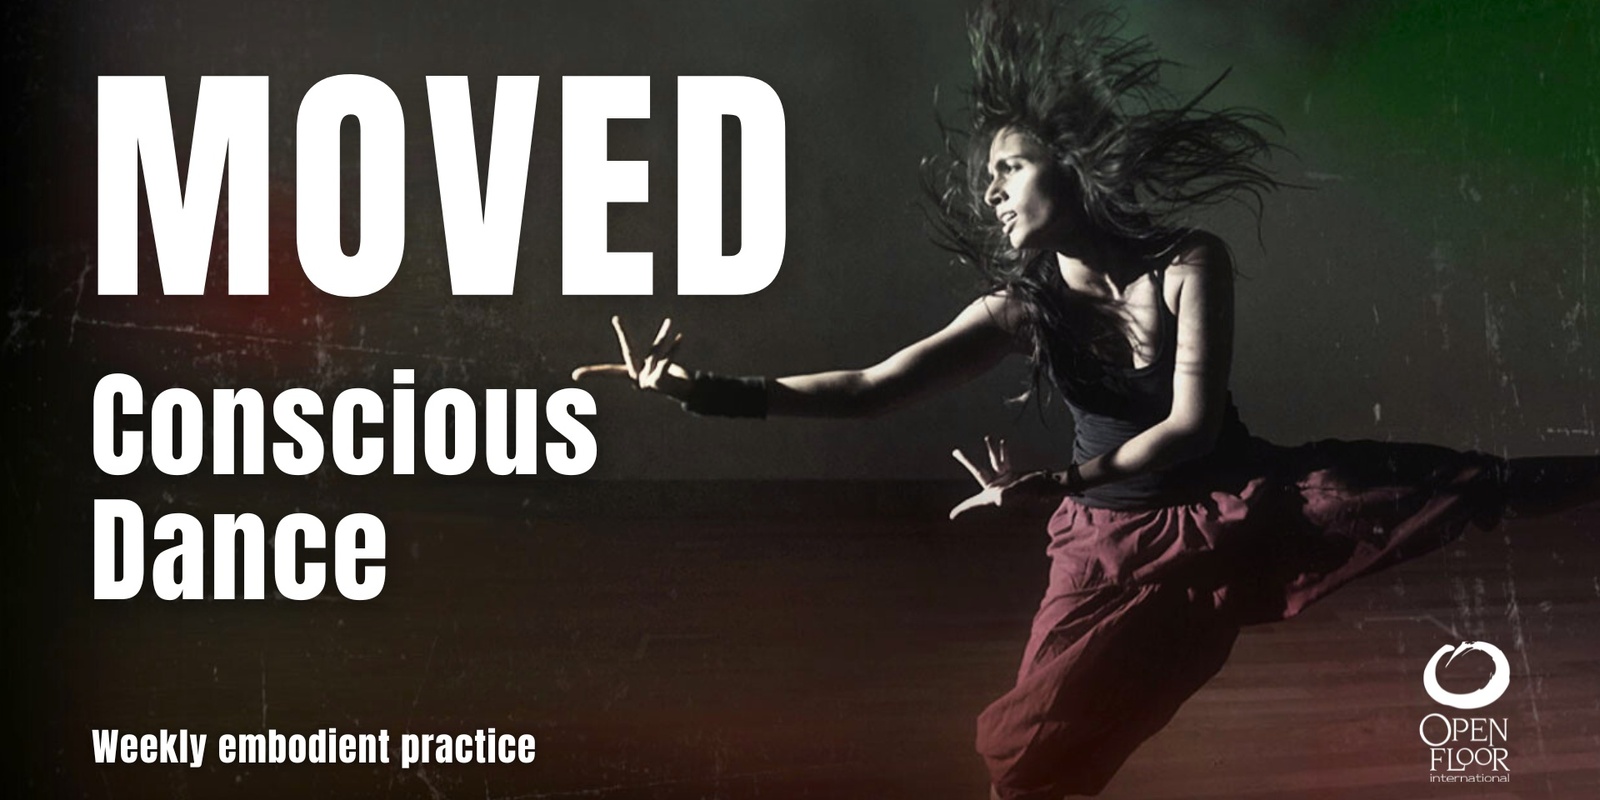 Banner image for MOVED Conscious Dance - Mar 27th